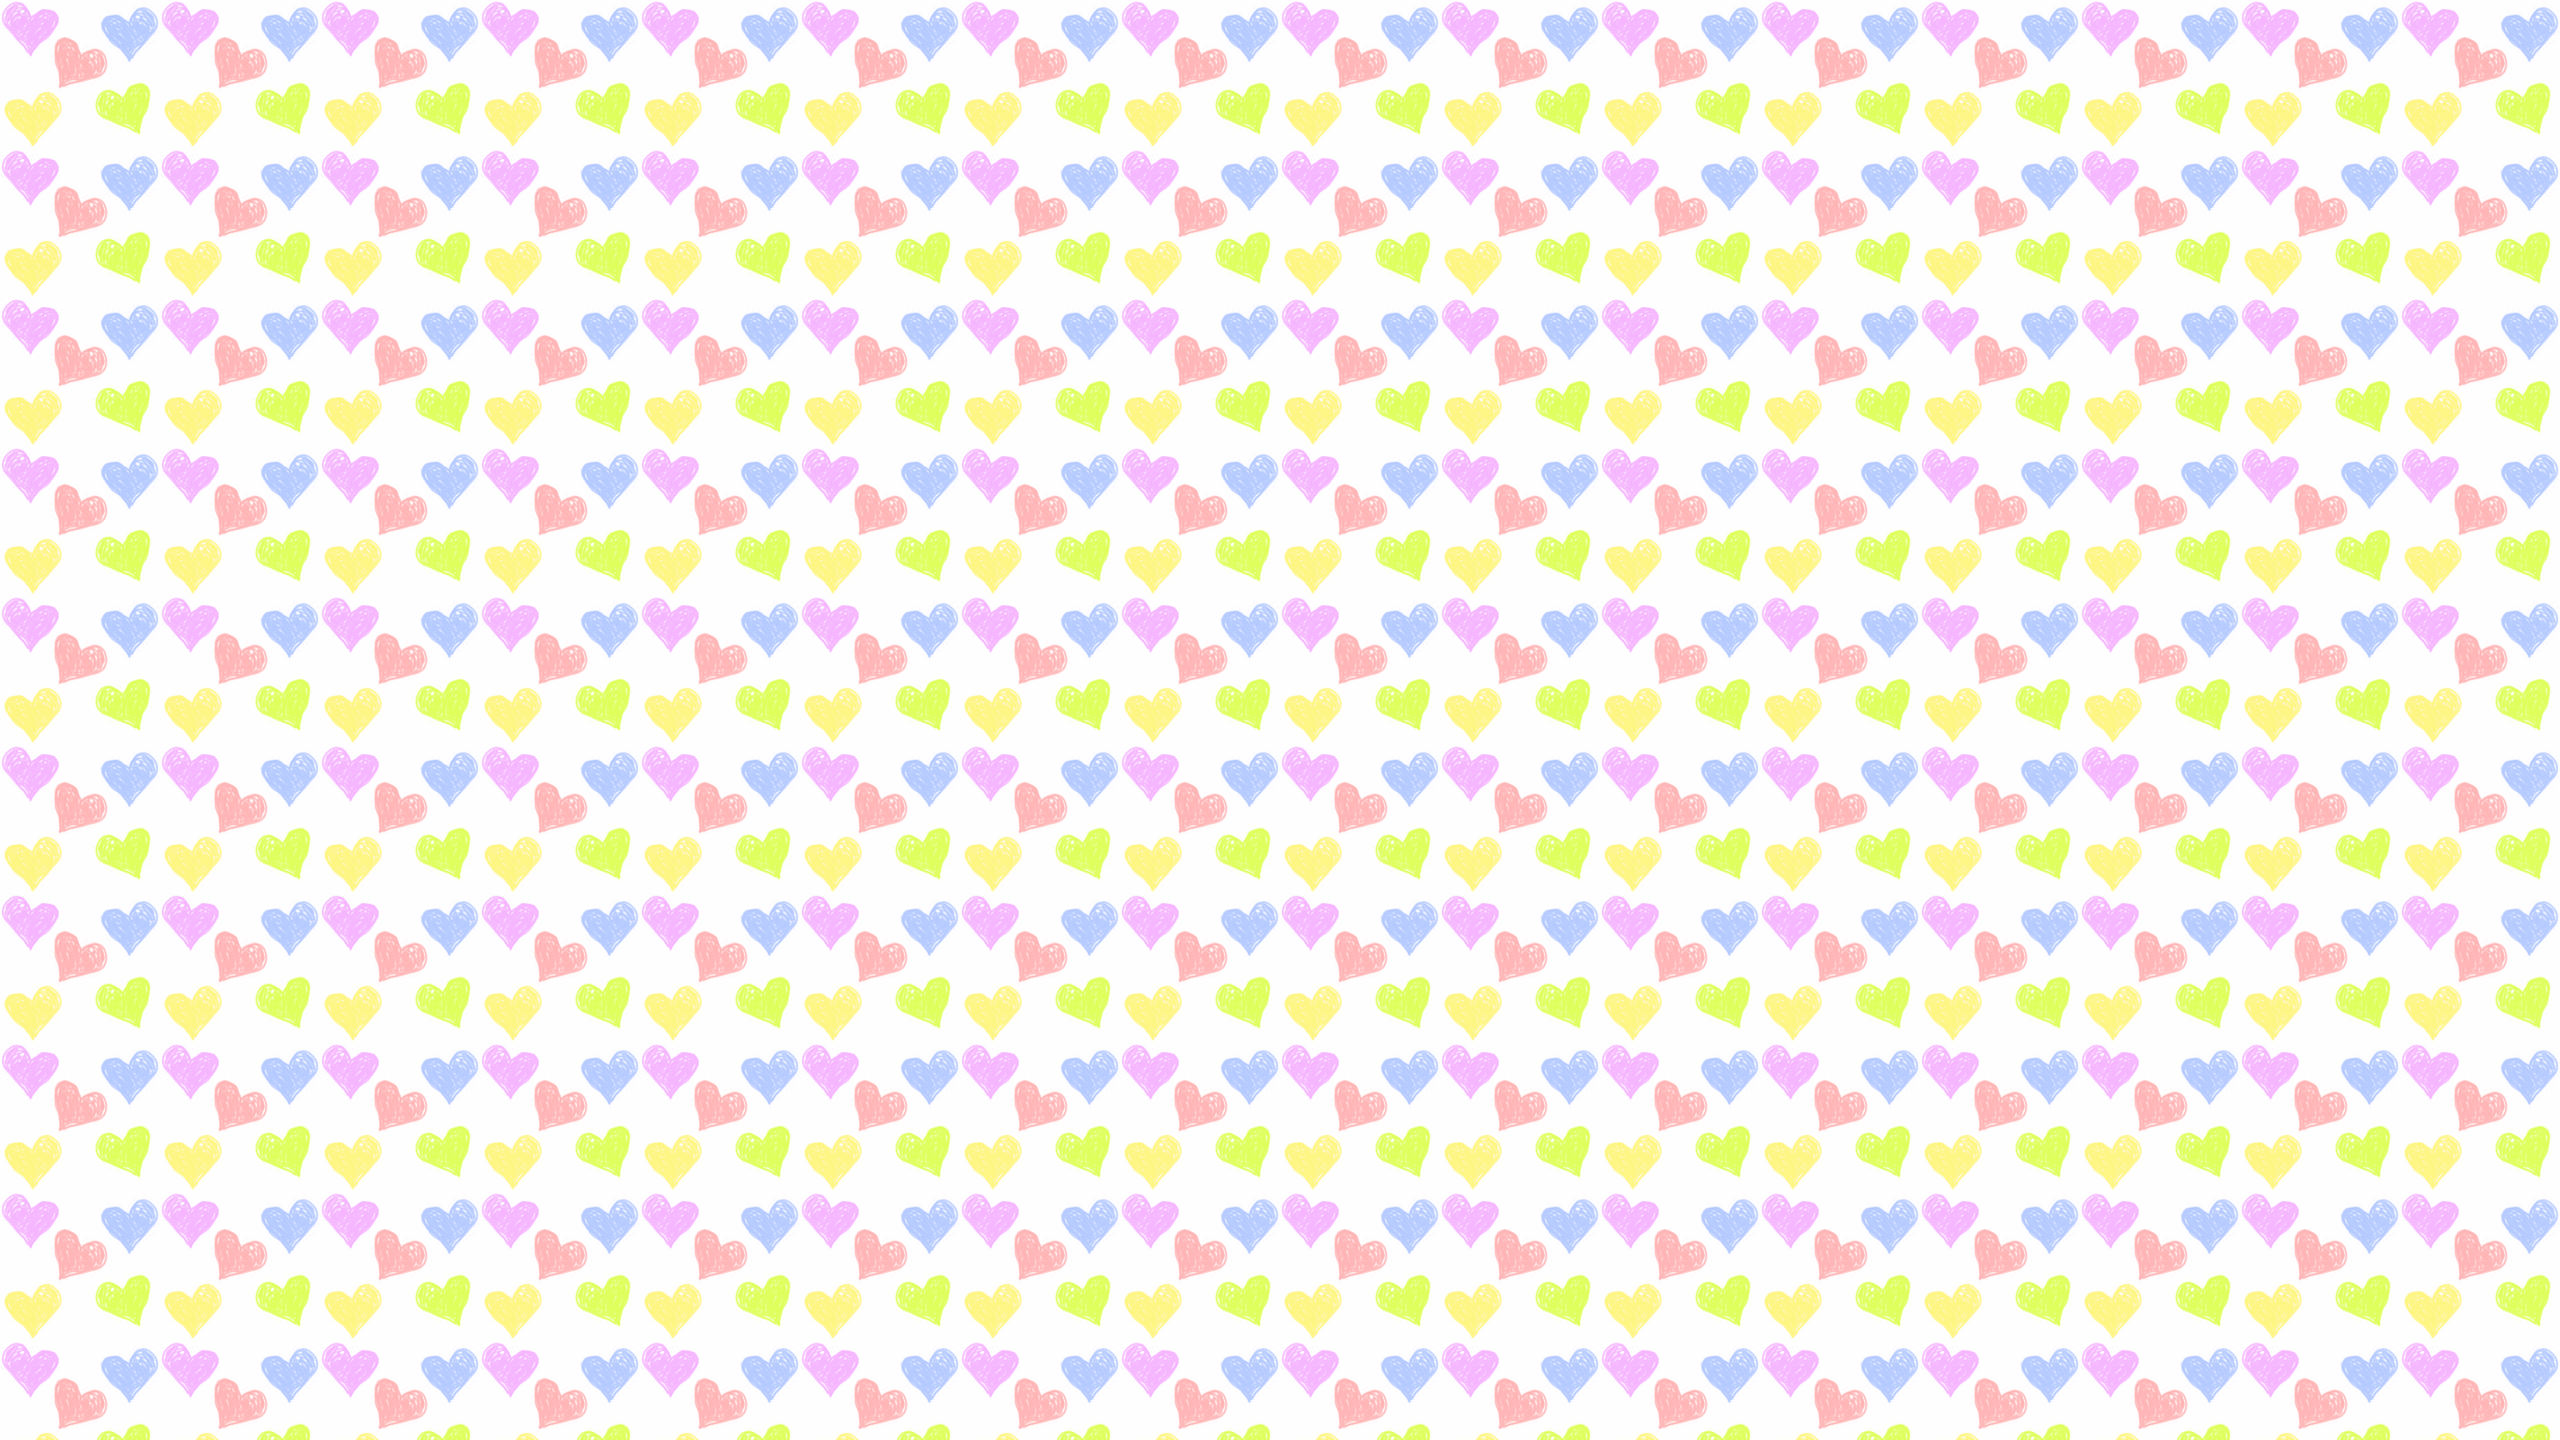 This Pastel Hearts Desktop Wallpaper Is Easy Just Save The